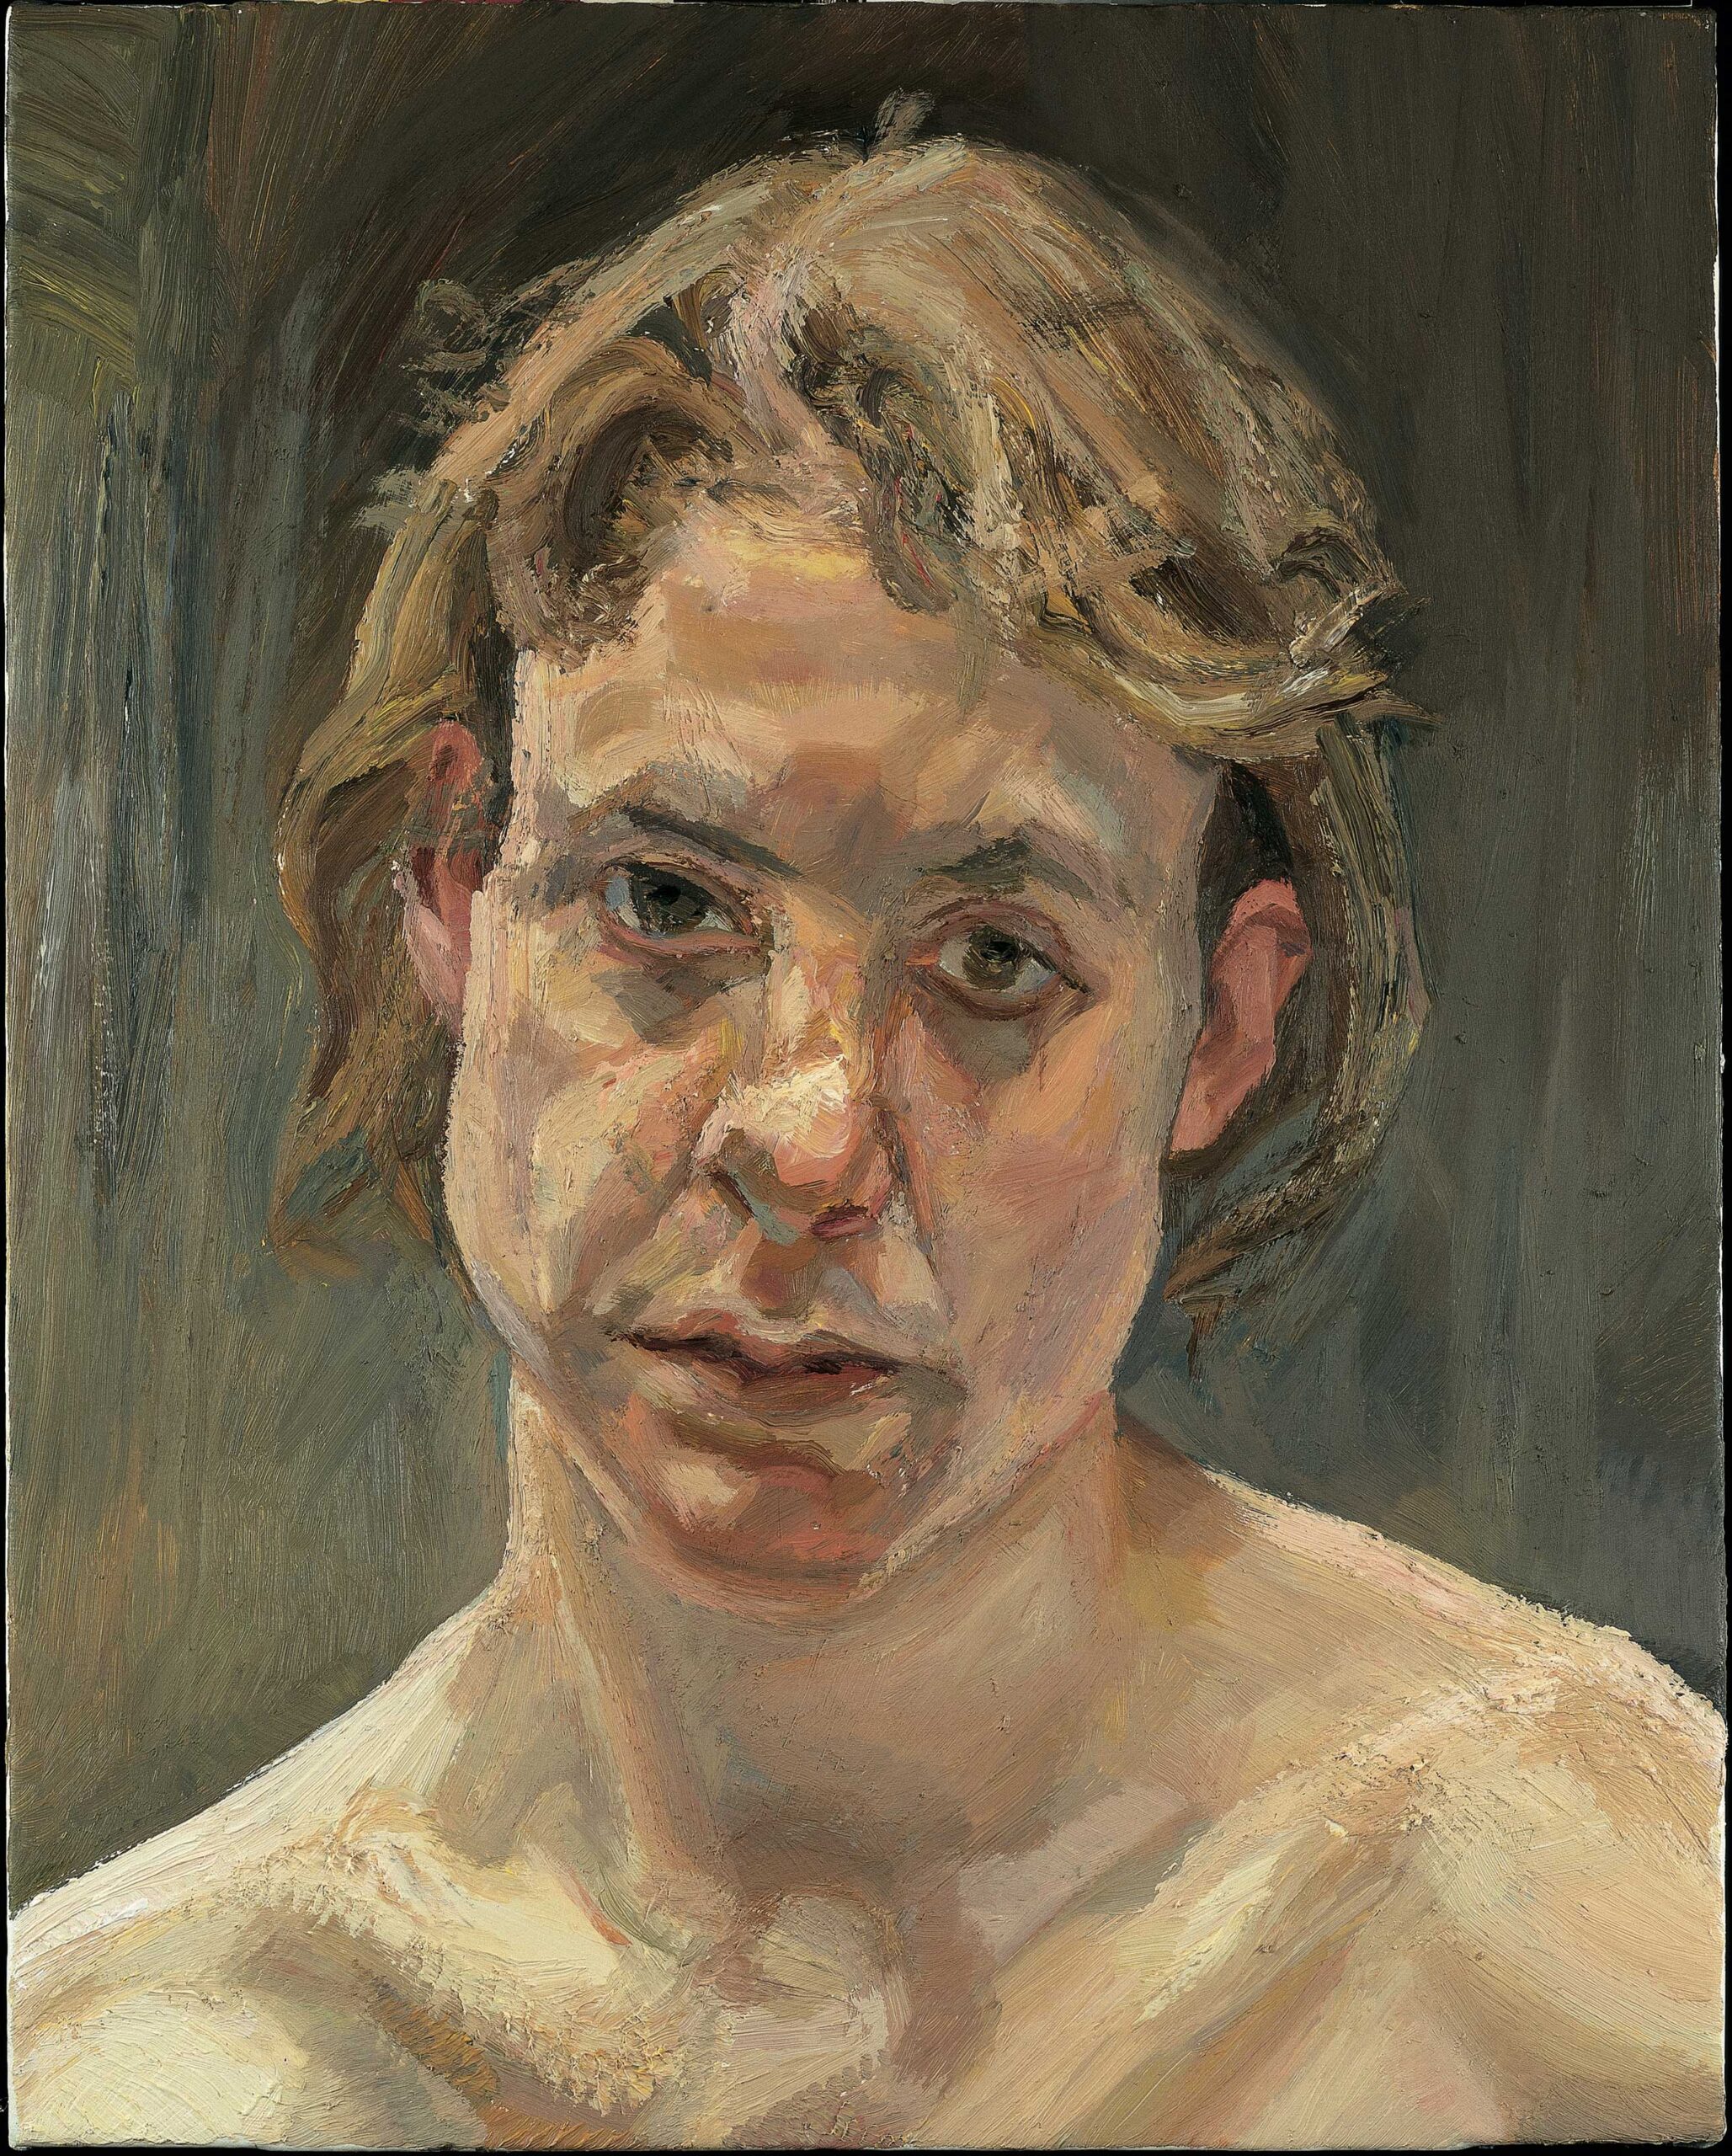 Lucian Freud, "Head of a Naked Girl," 1999, Oil on canvas, 50.7 x 40.5 cm 20 1/4 x 16", UBS Art Collection © The Lucian Freud Archive. All Rights Reserved 2024 / Bridgeman Images